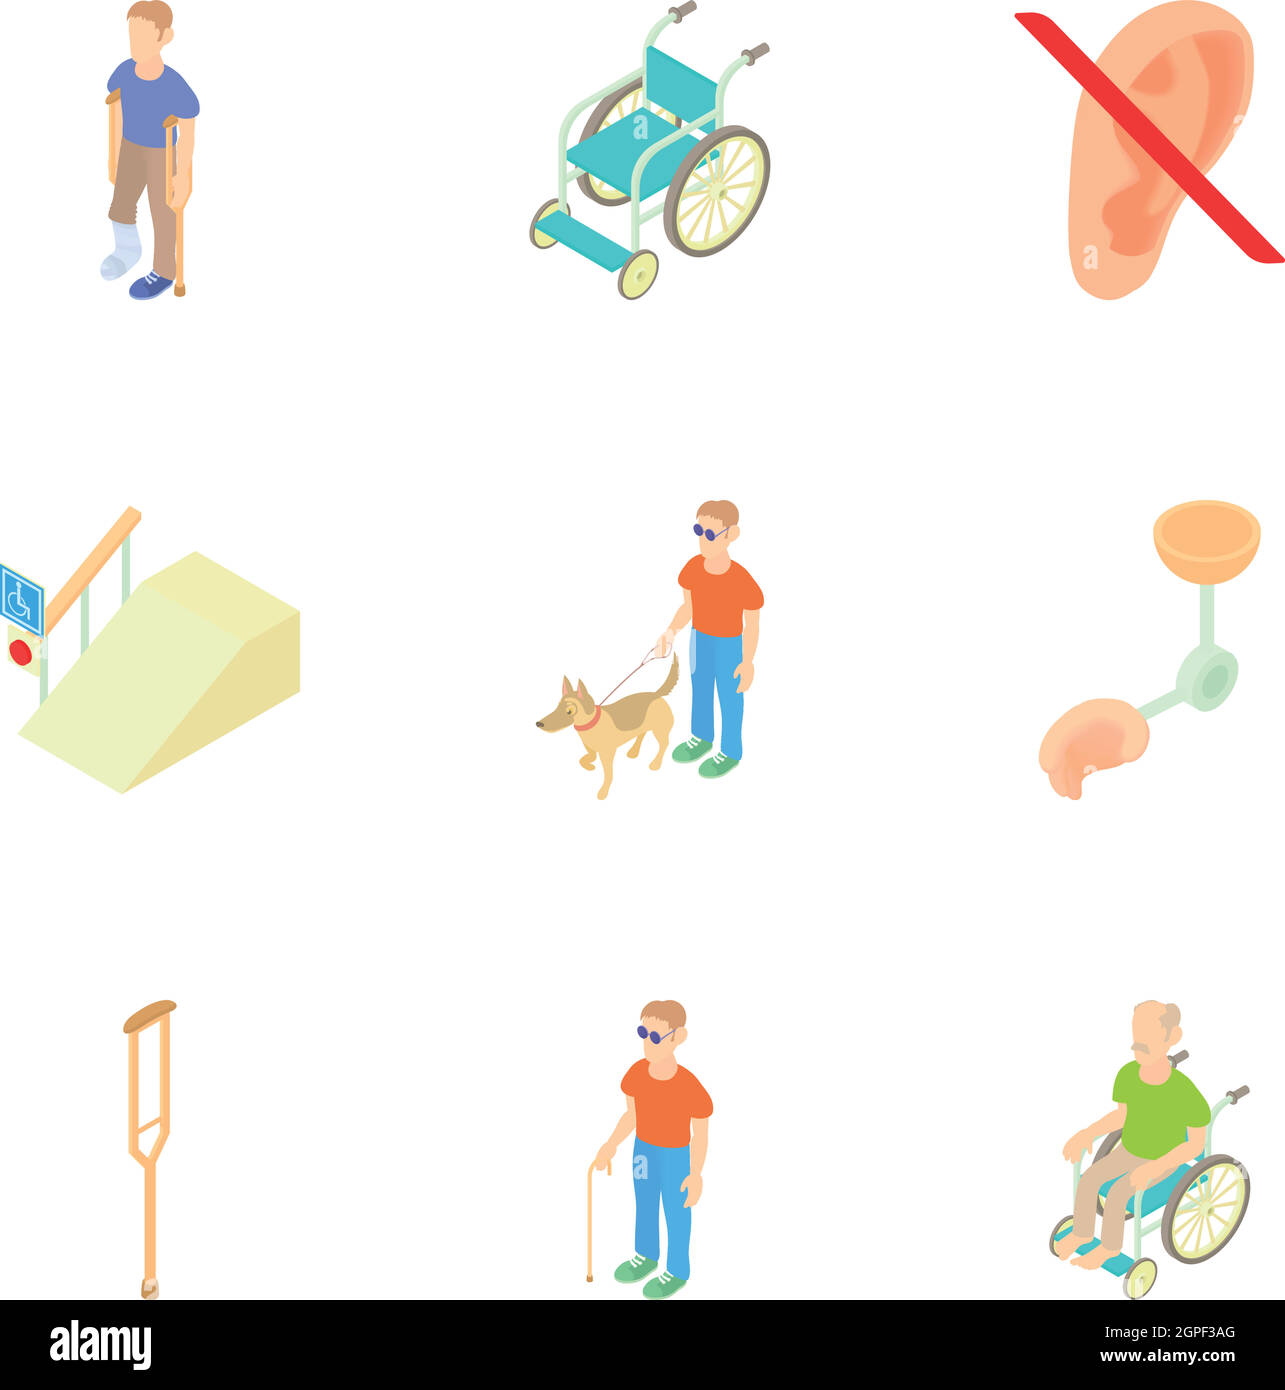 People with special needs opportunities icons set Stock Vector